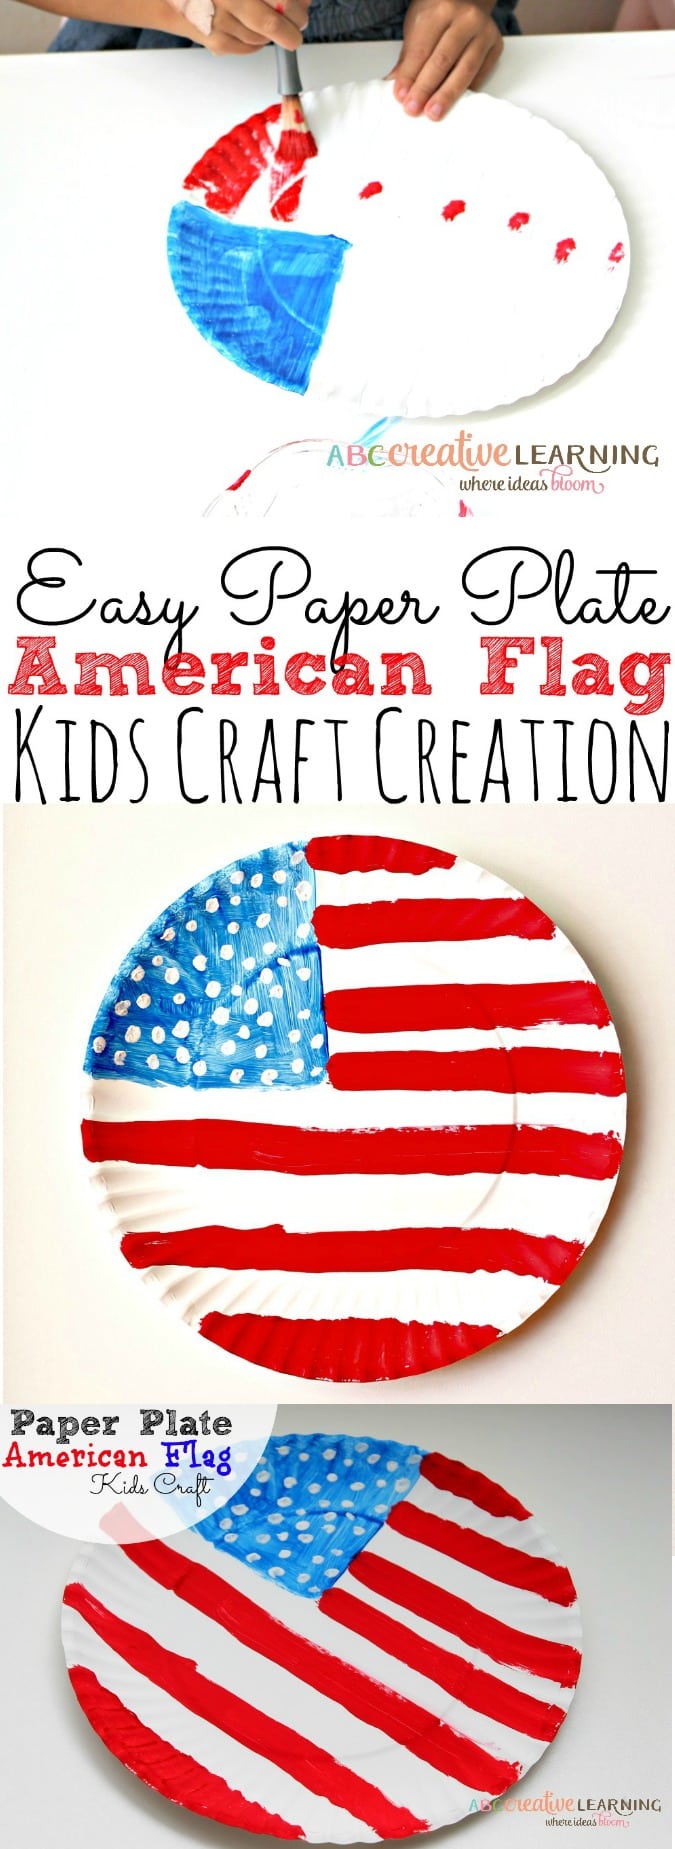 Paper Plate American Flag Craft | Perfect for Memorial Day and 4th of July